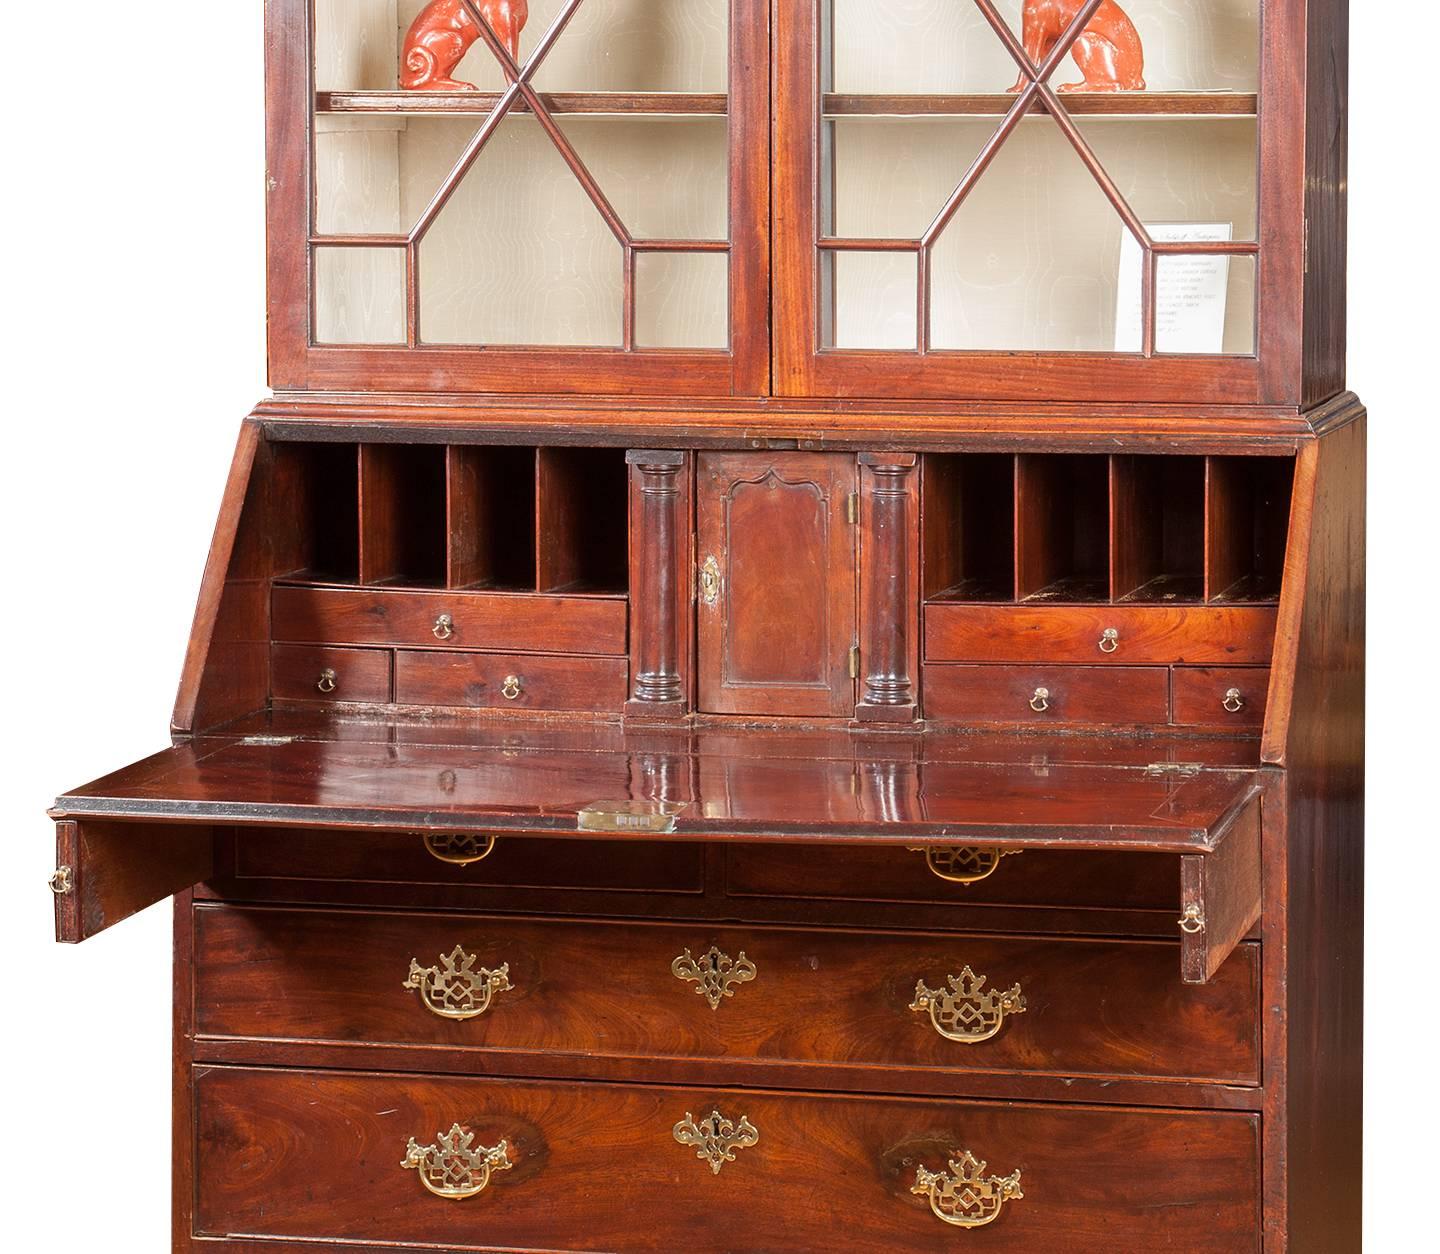 Chippendale secretary, with a carved broken, pediment top with glazed doors,
the bottom with a slant front, the interior with small drawers and document column shaped drawers, below two small and three larger graduated drawers
made from the finest